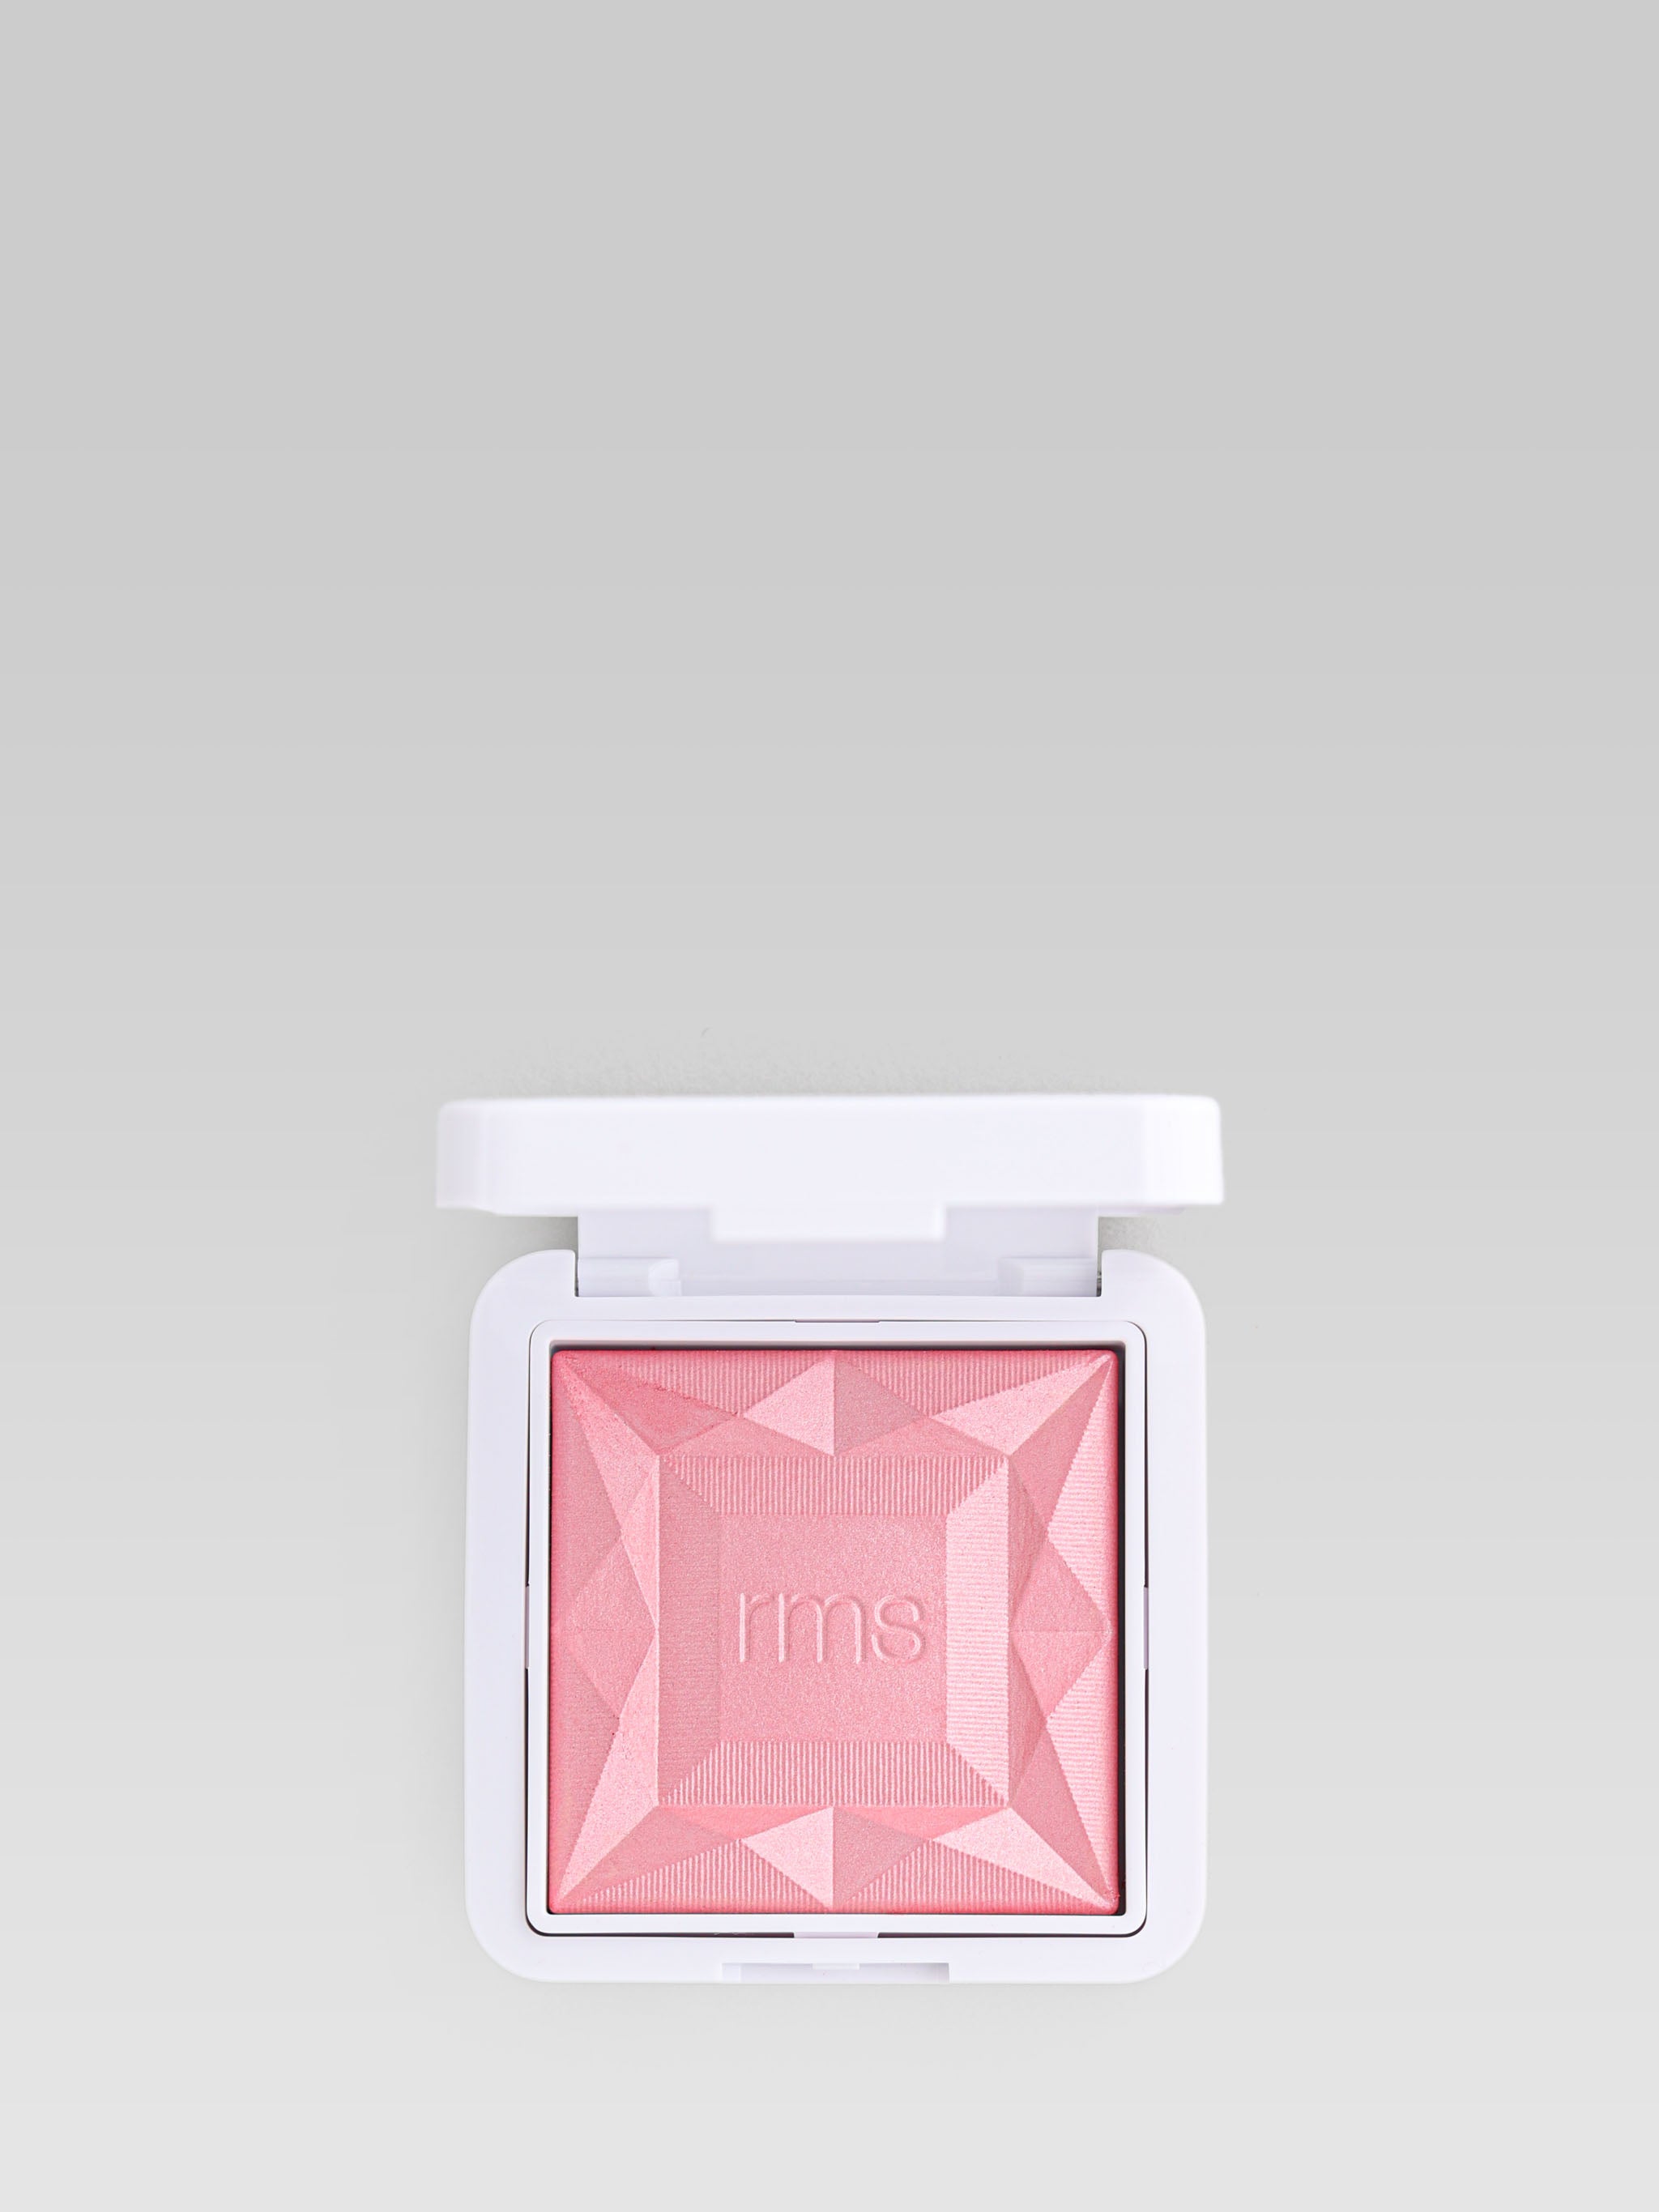 RMS BEAUTY “Re” Dimension Hydra Powder Blush in French Rose product shot